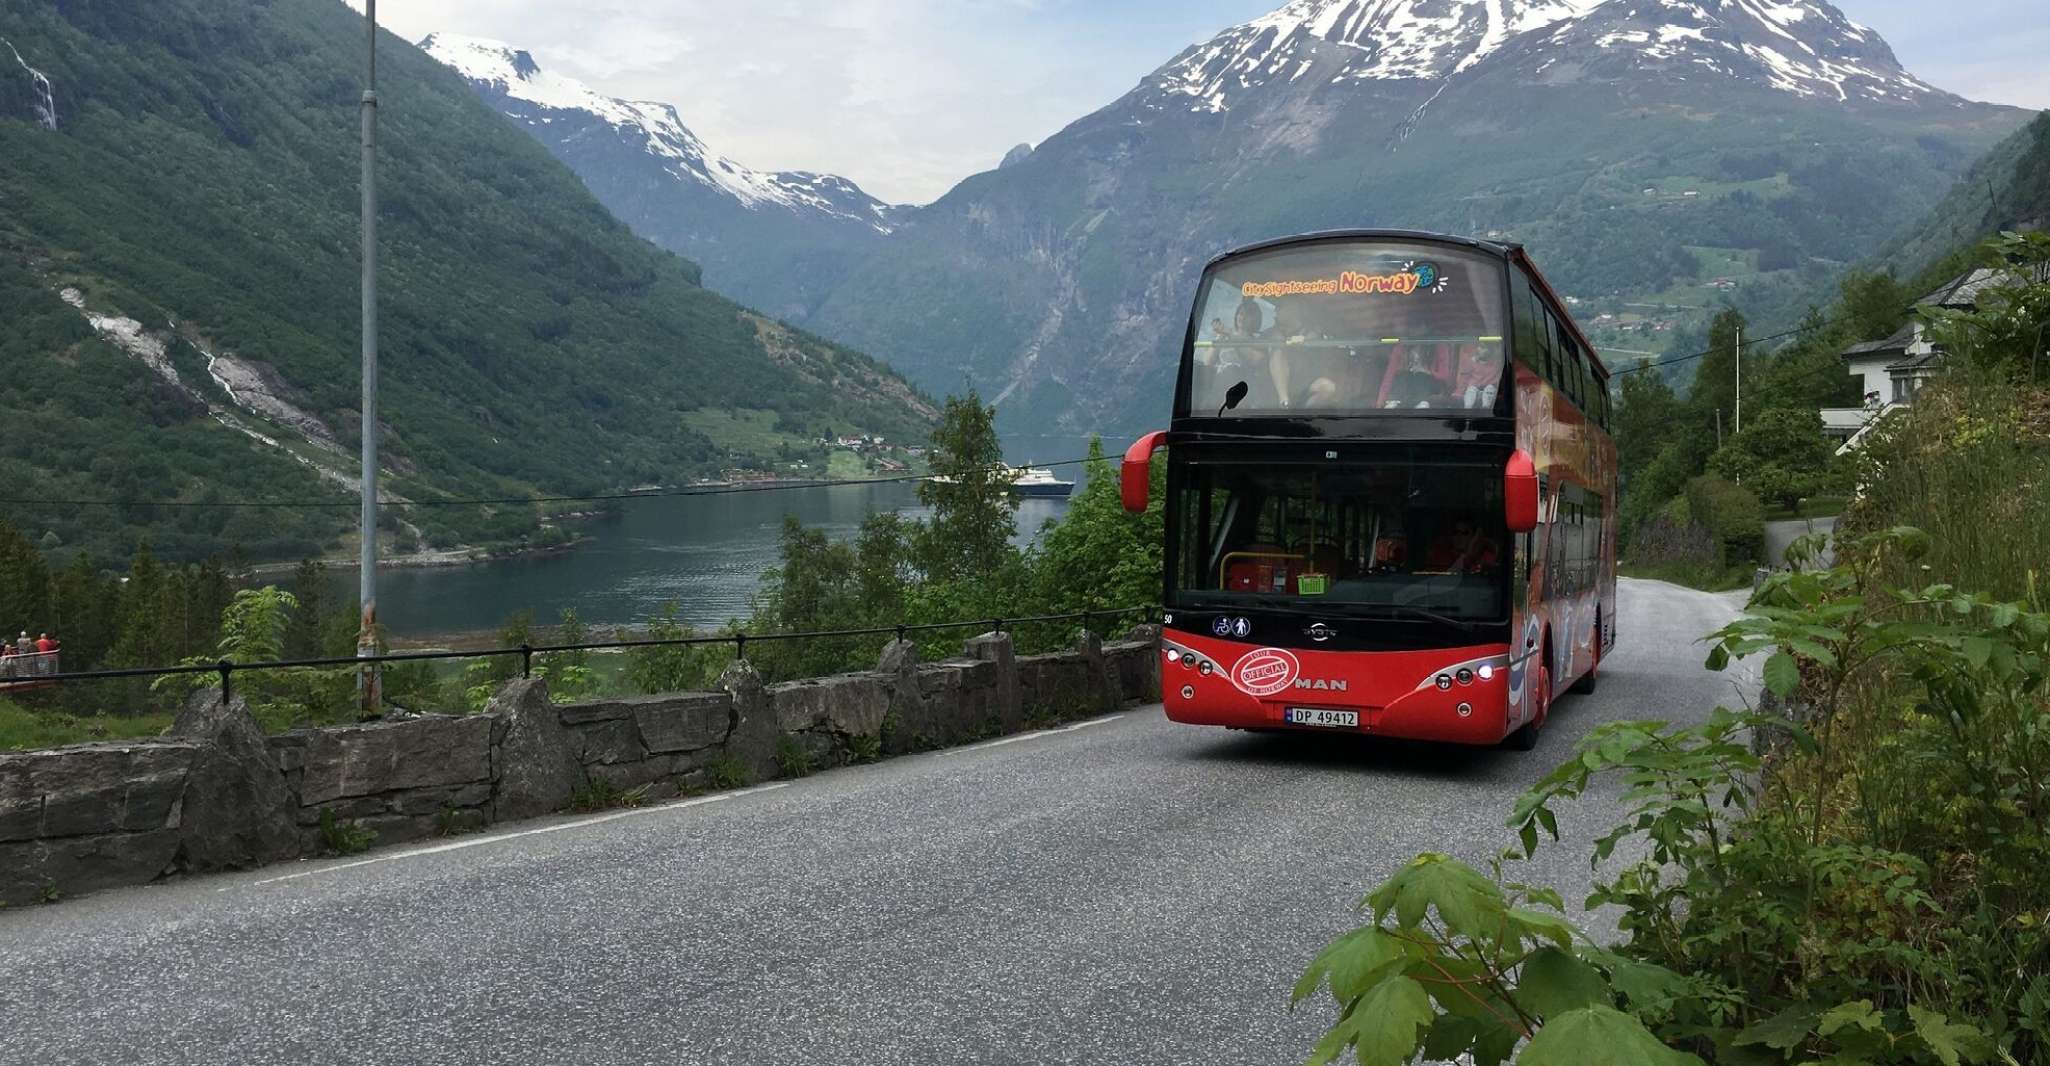 Geiranger, City Sightseeing Hop-On Hop-Off Bus Tour - Housity